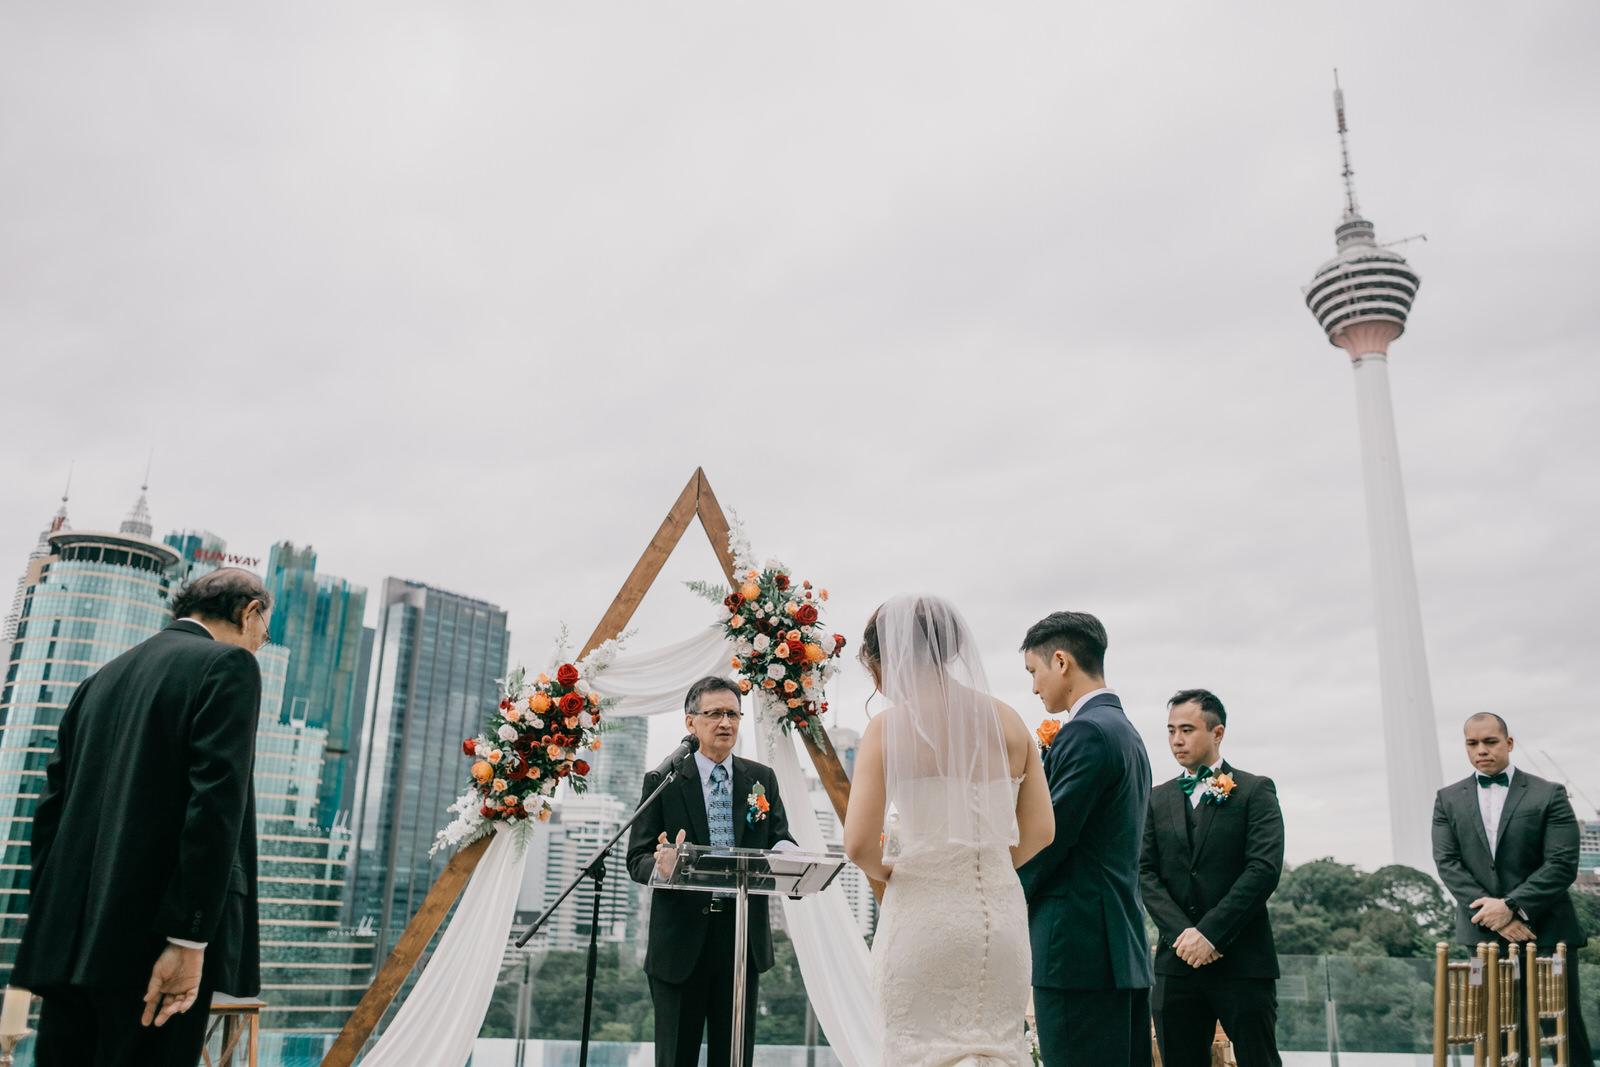 Father & Bride March In Boho Deco Rooftop Poolside Wedding at Hotel Stripes Kuala Lumpur MCO2.0 Cliff Choong Photography Malaysia Covid19 ROM 